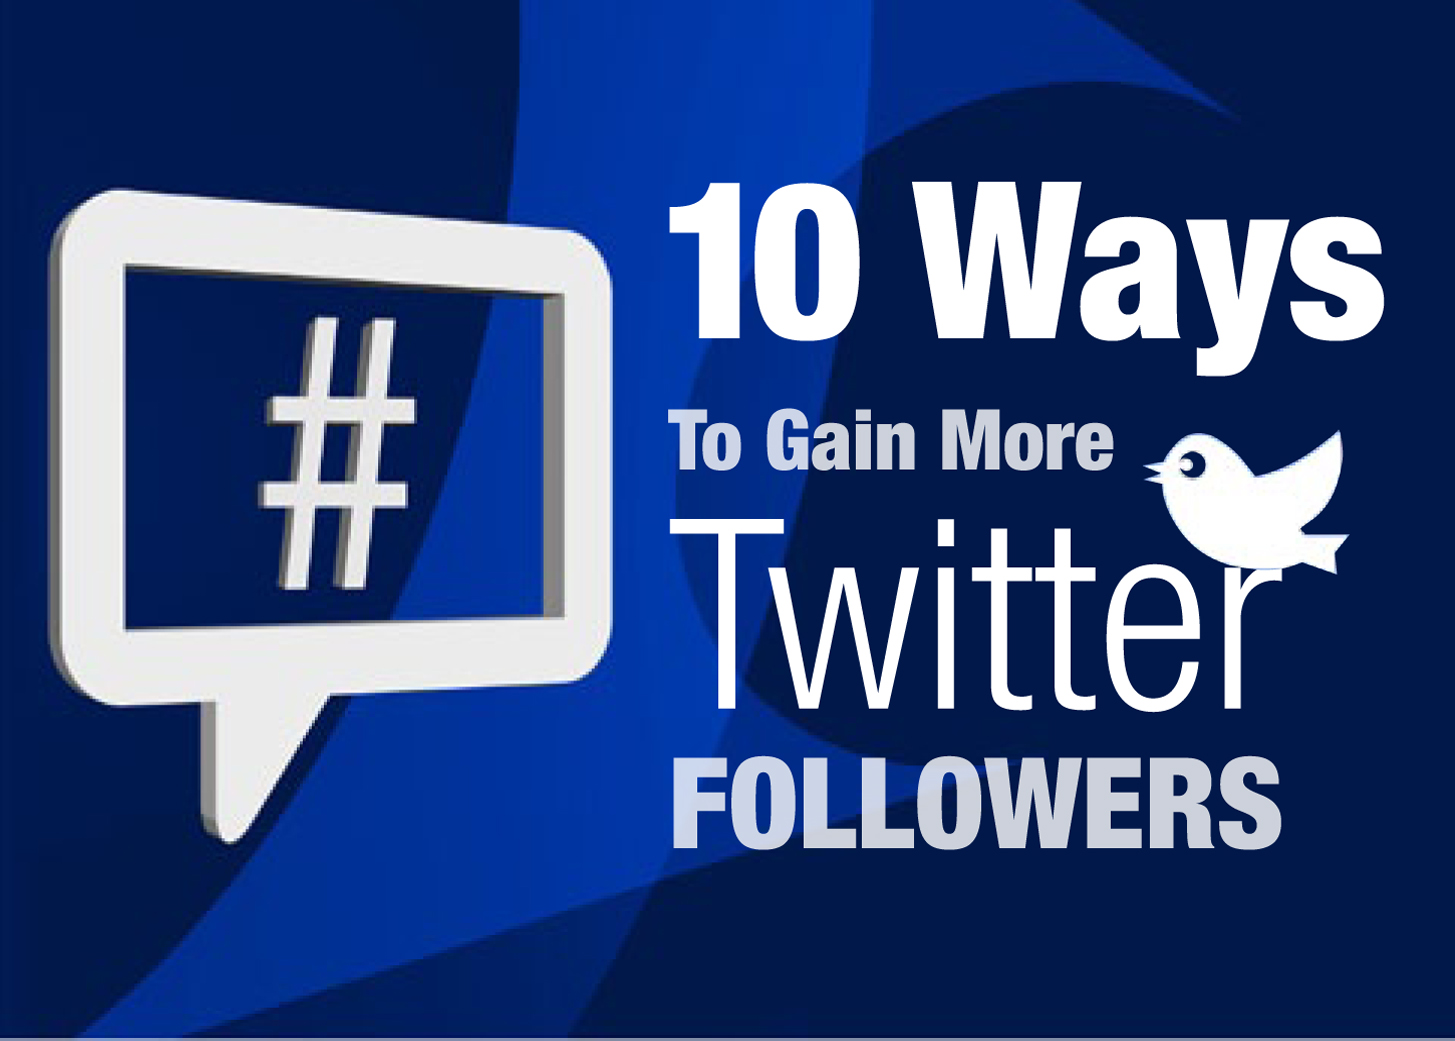 10 ways to gain more More Twitter Followers